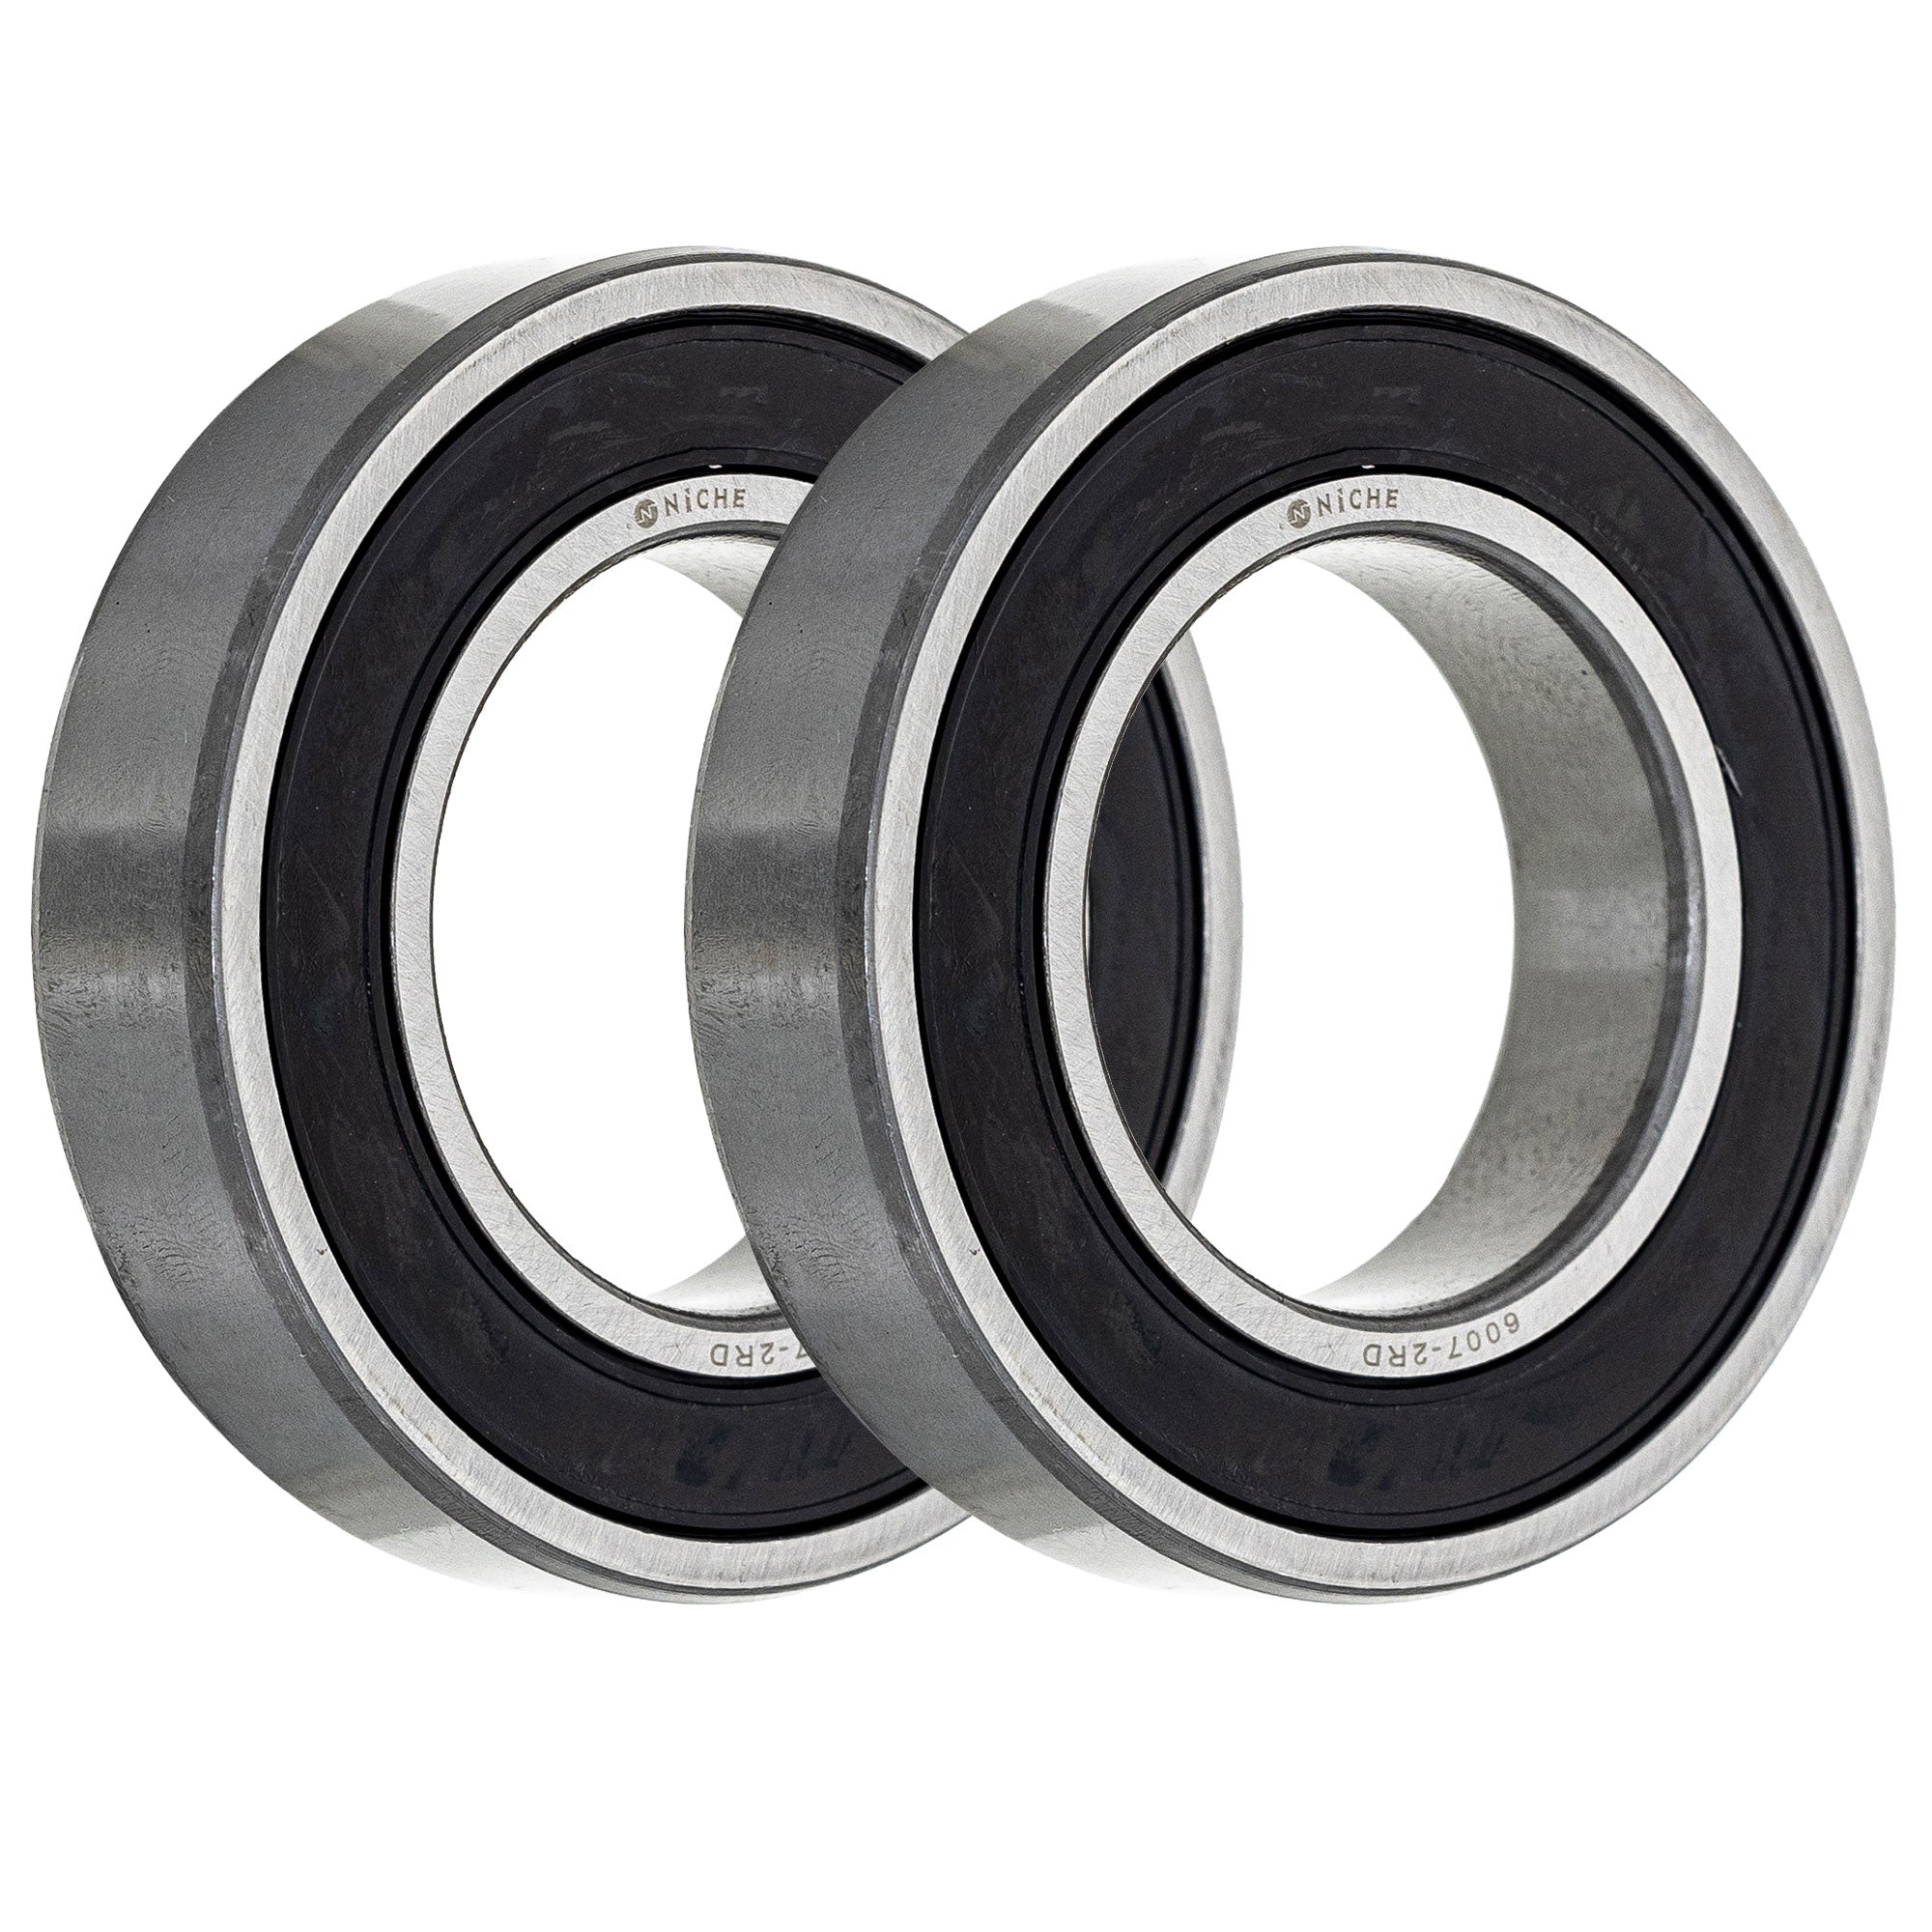 Electric Grade, Single Row, Deep Groove, Ball Bearing Pack of 2 2-Pack for zOTHER XR650R NICHE 519-CBB2274R